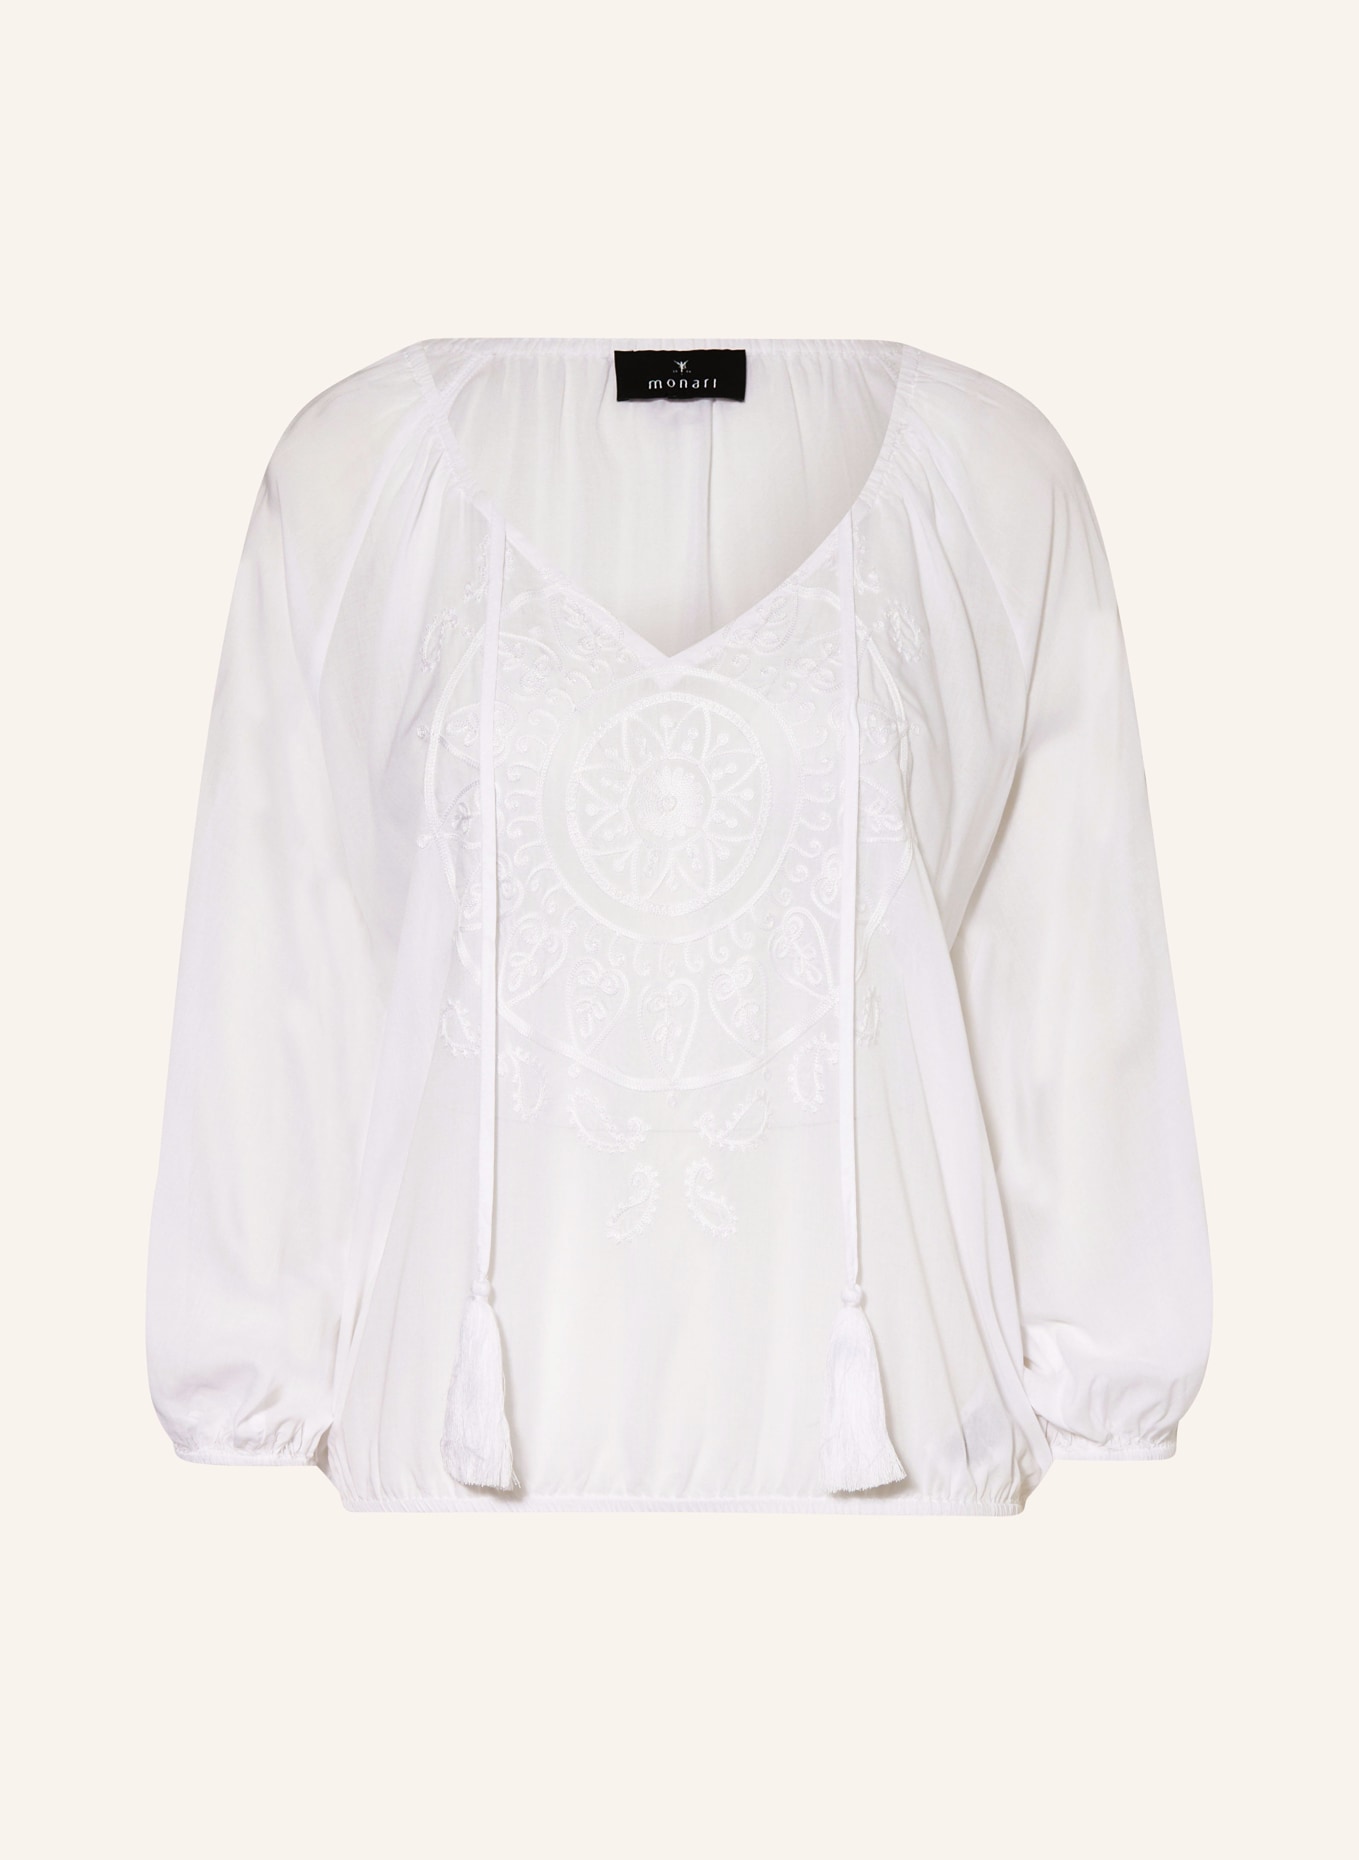 monari Shirt blouse with 3/4 sleeves, Color: WHITE (Image 1)